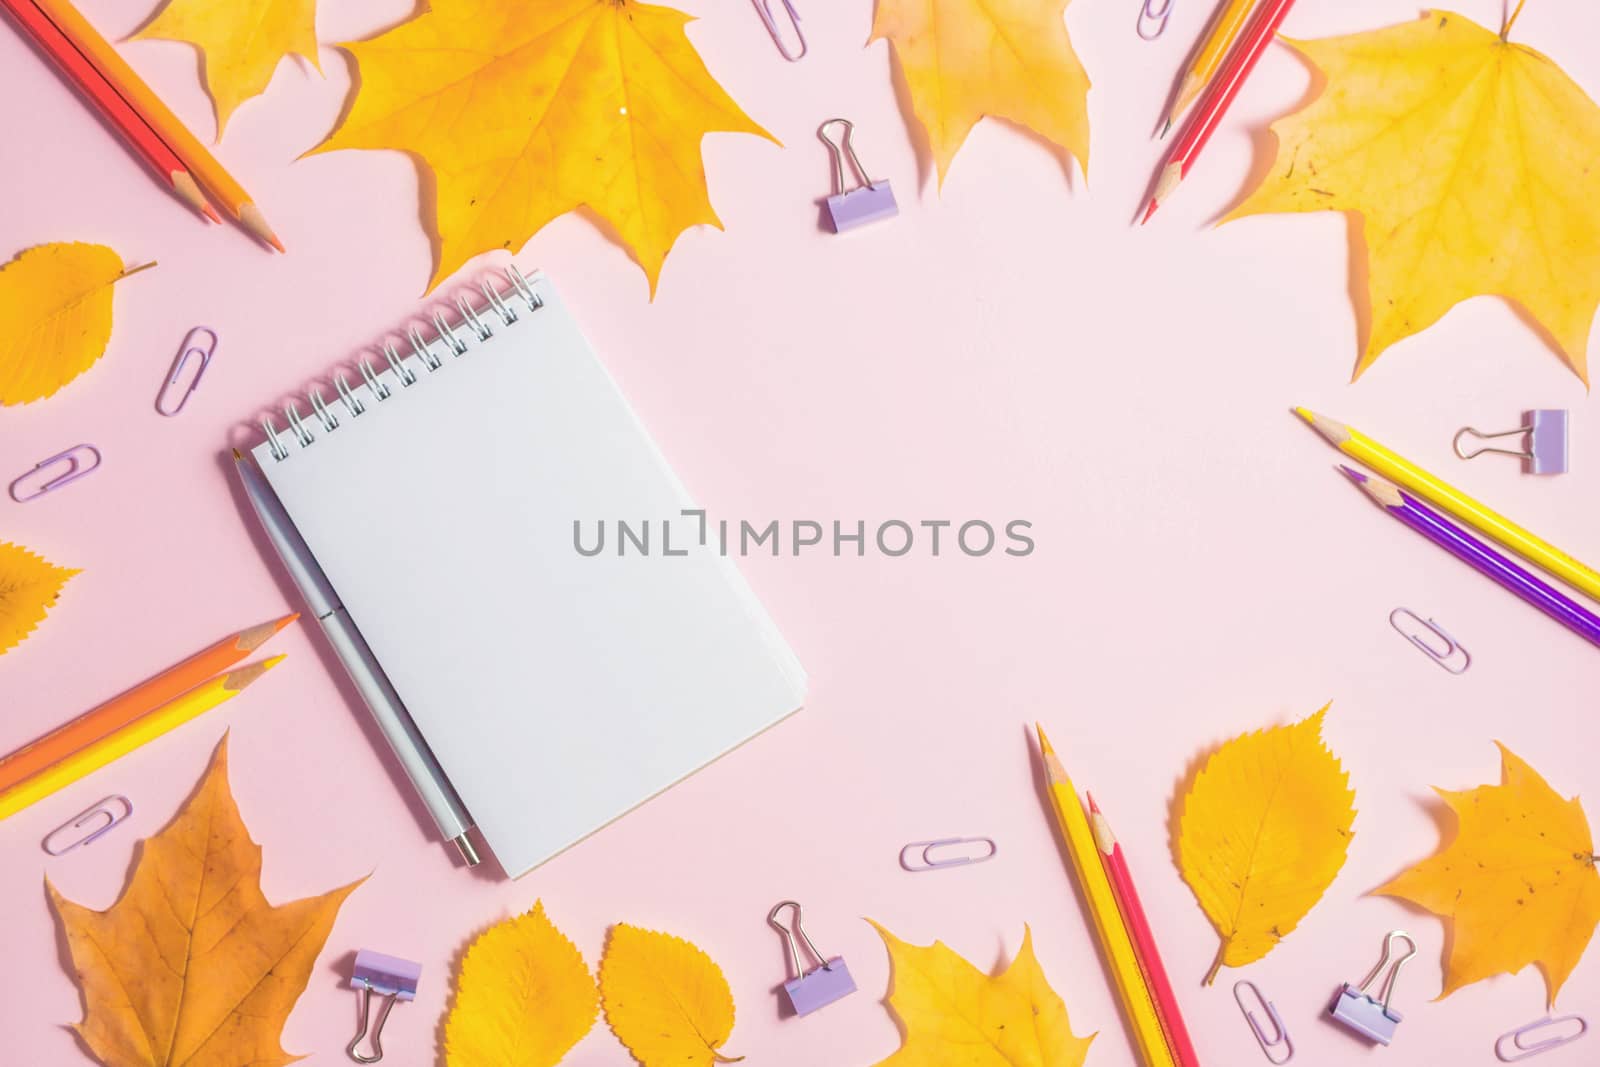 .Autumn fallen foliage and notebook on pink background